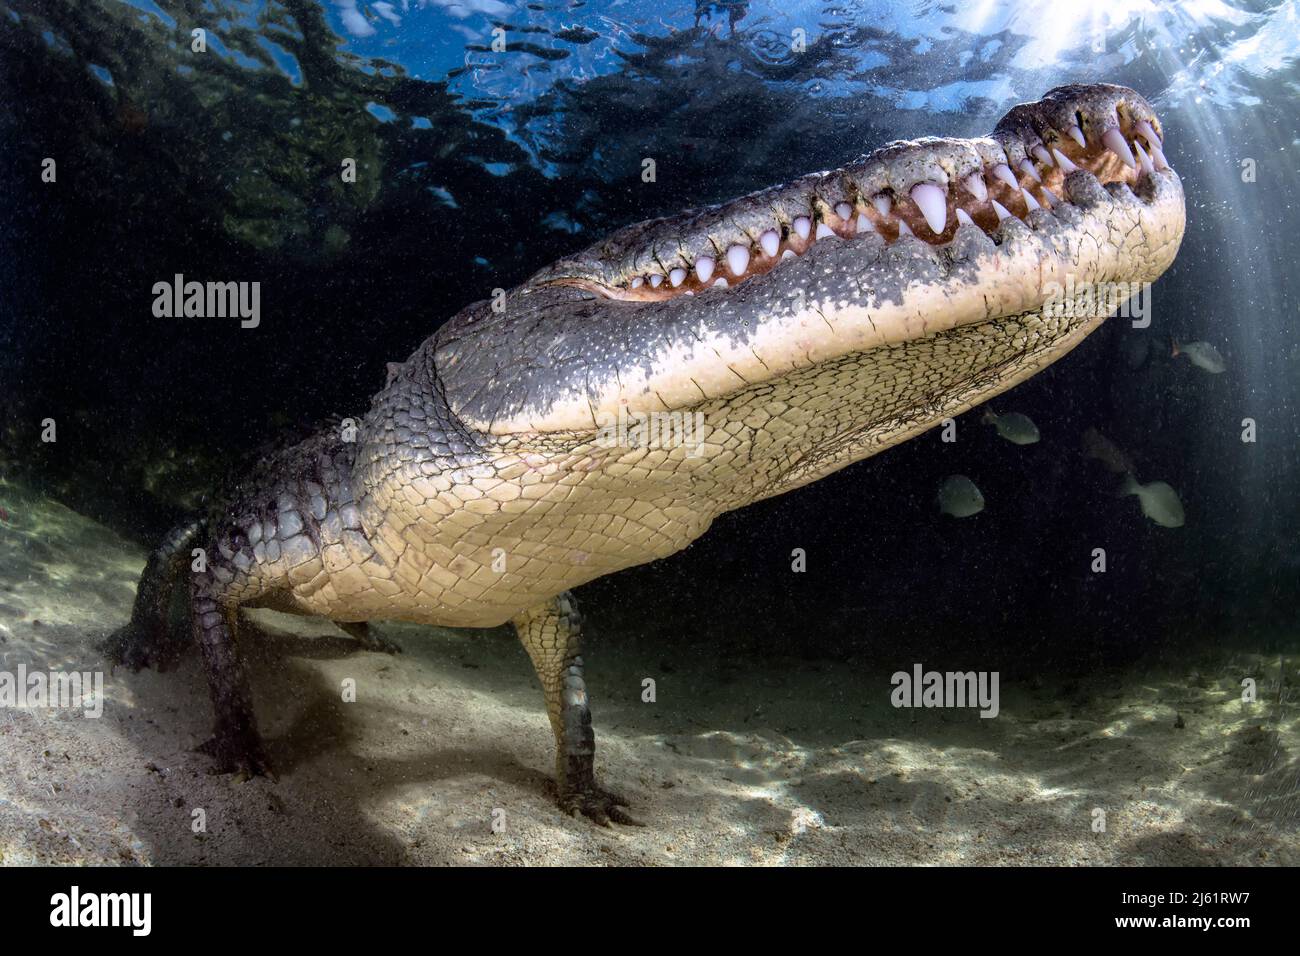 An american crocodile (Crocodylus acutus) in the shallow waters of Banco Chinchorro, a coral reef located off the southeastern coast of the municipali Stock Photo